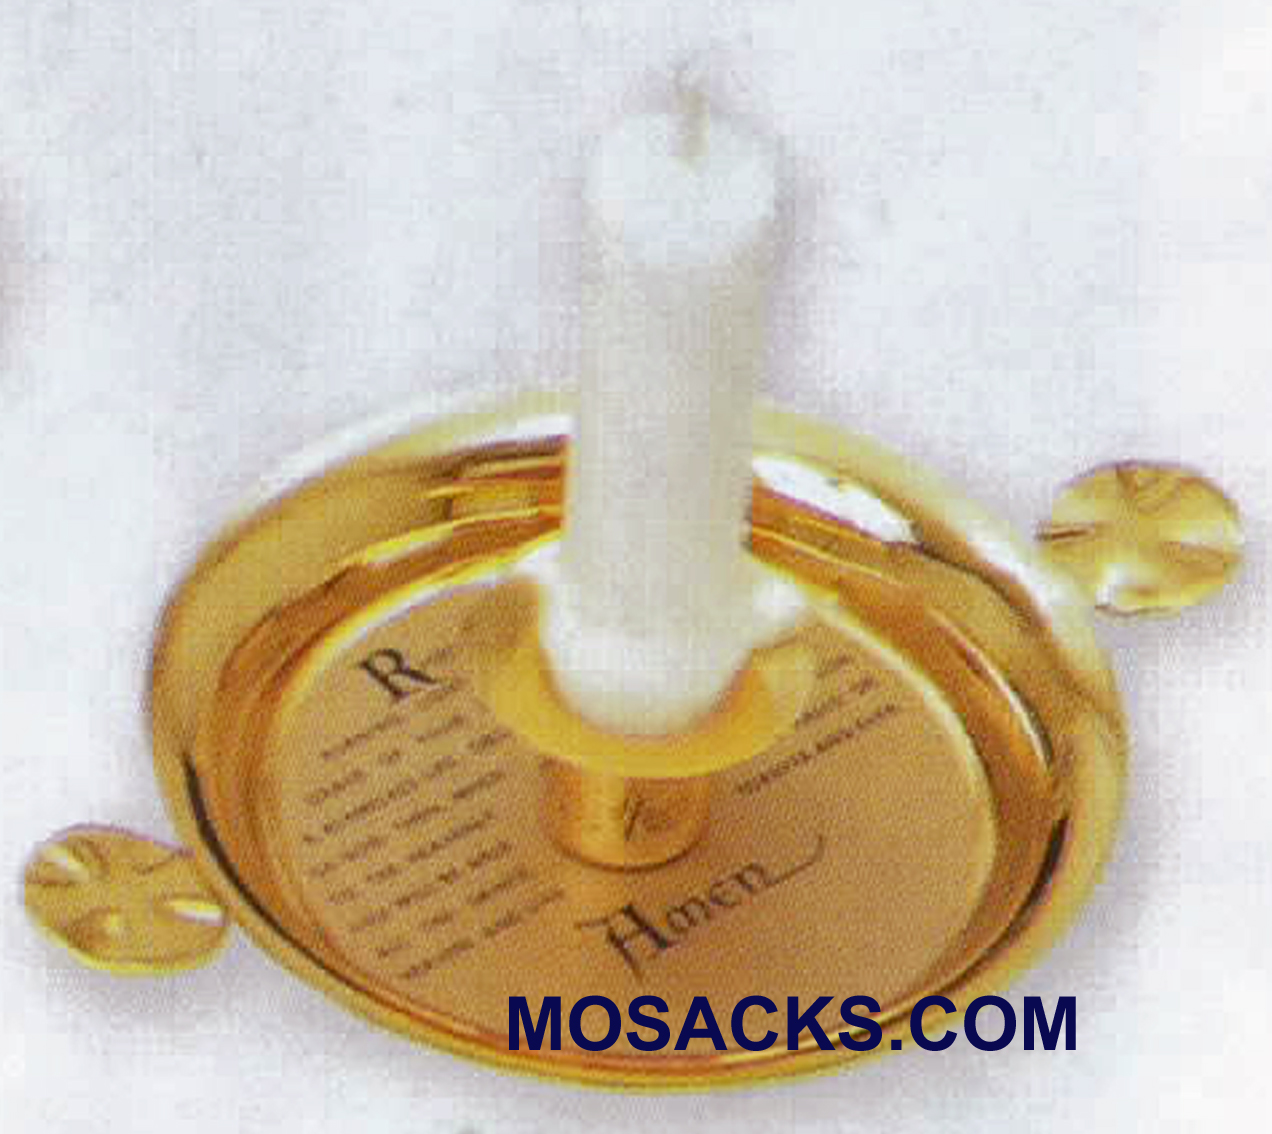 Baptismal Candlestick With Etched Prayer -K18 Gold or Silver